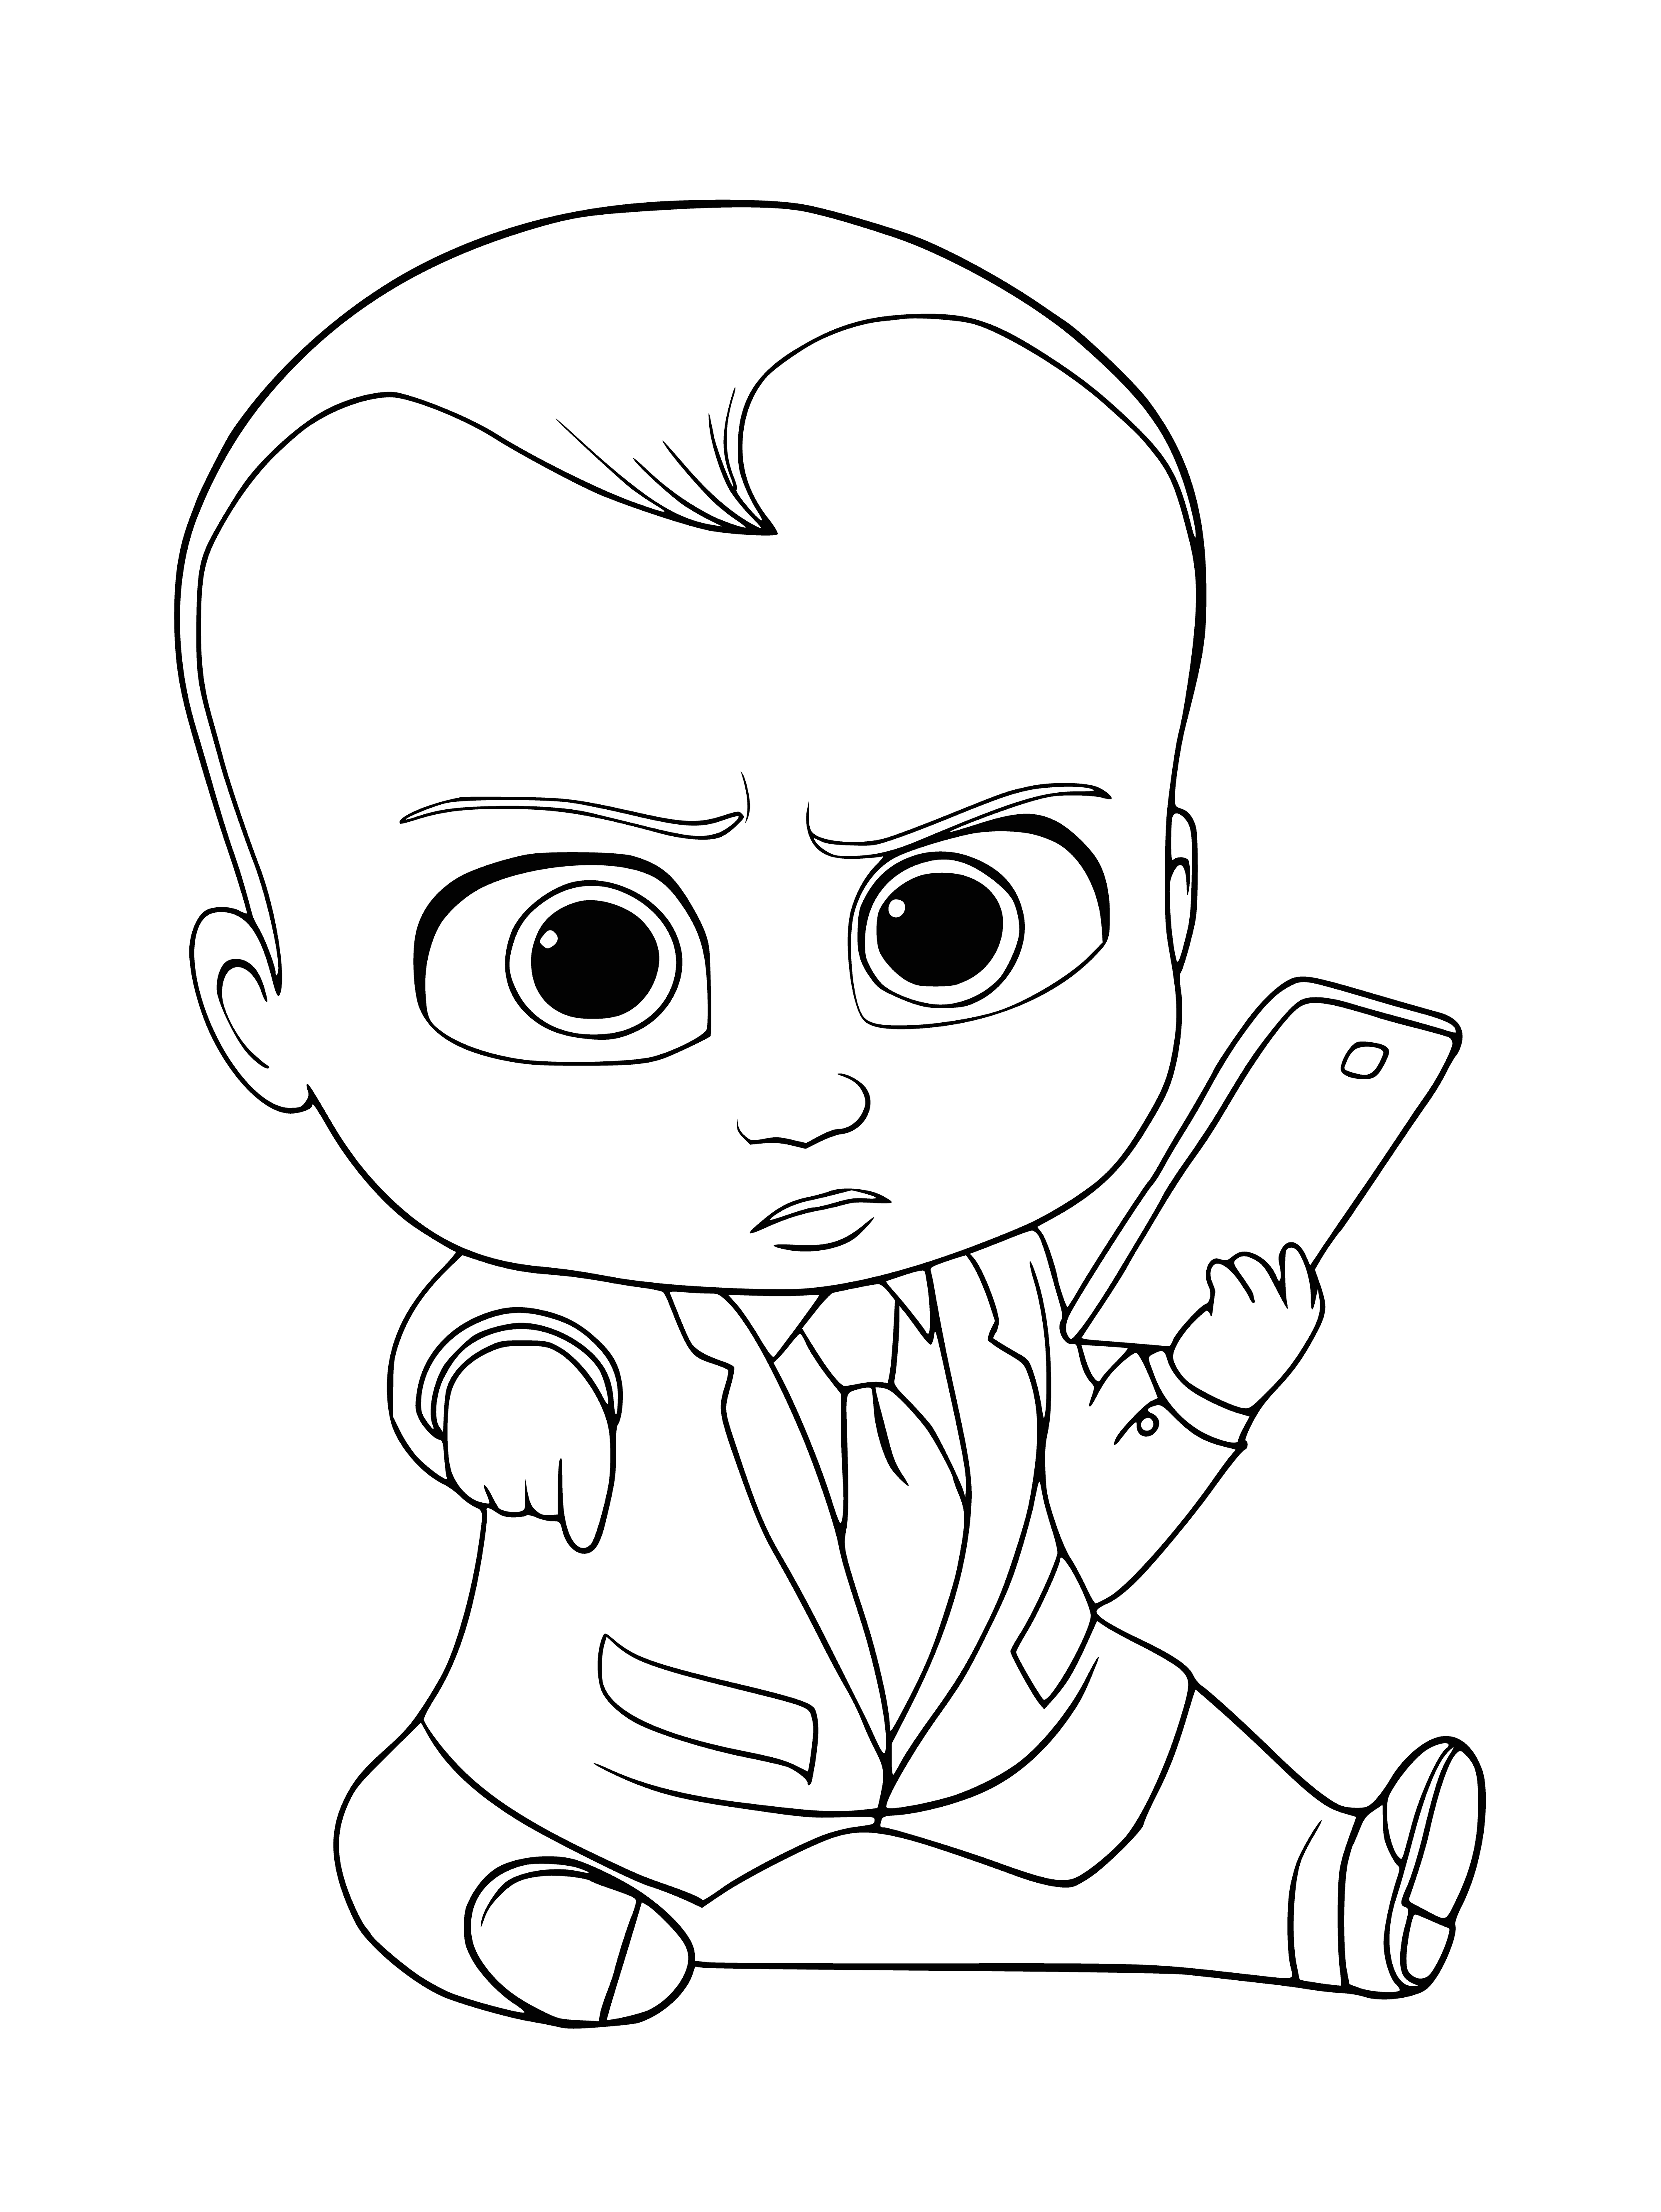 Boss baby boy with cell phone coloring page